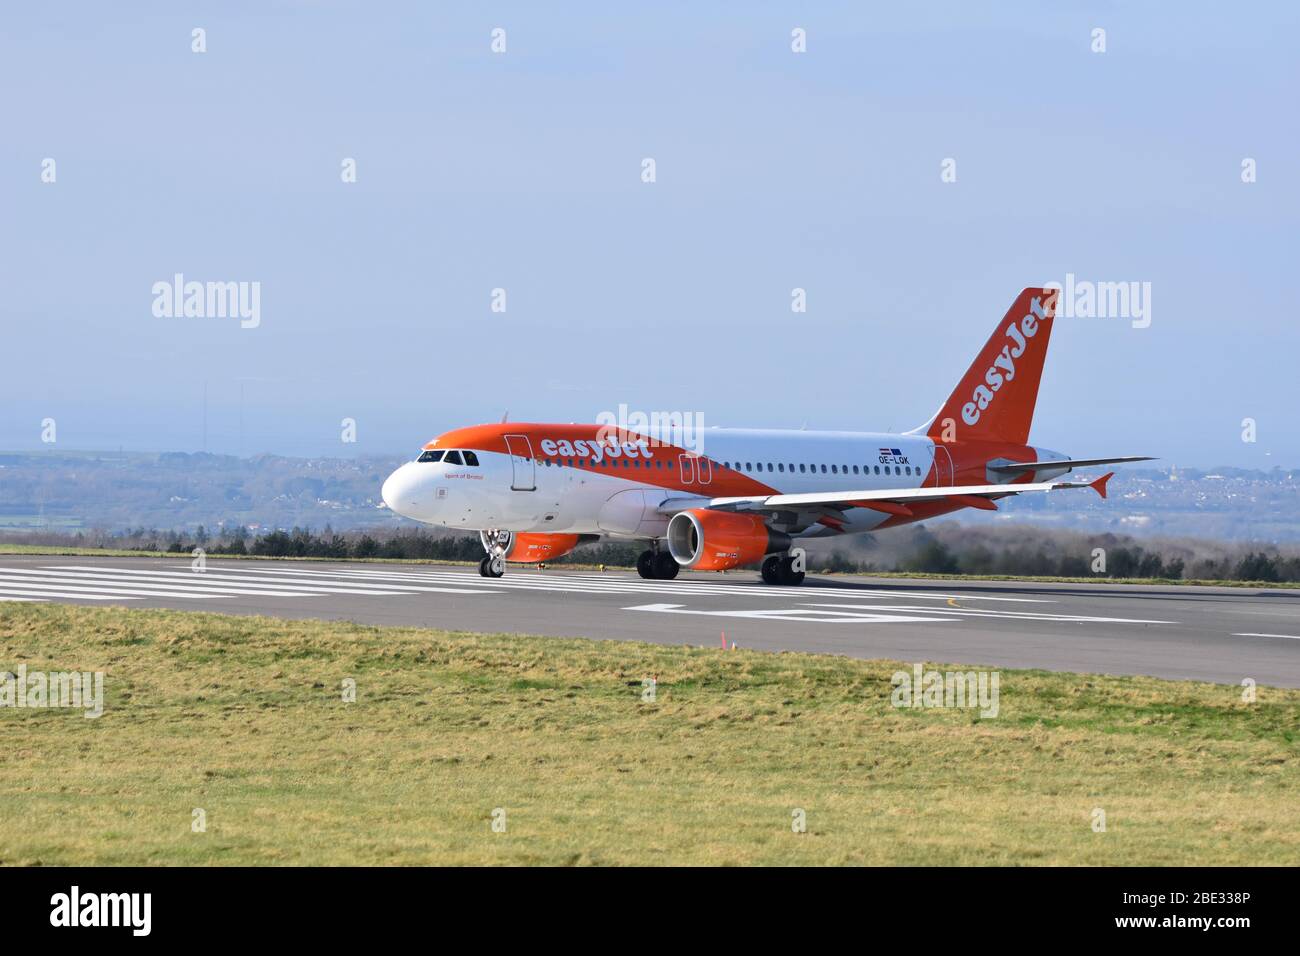 OE-LKQ EASyJET EUROPE AIRBUS A319-100 on the ground at Bristol International Airport on the 6th of February 2020 Stock Photo